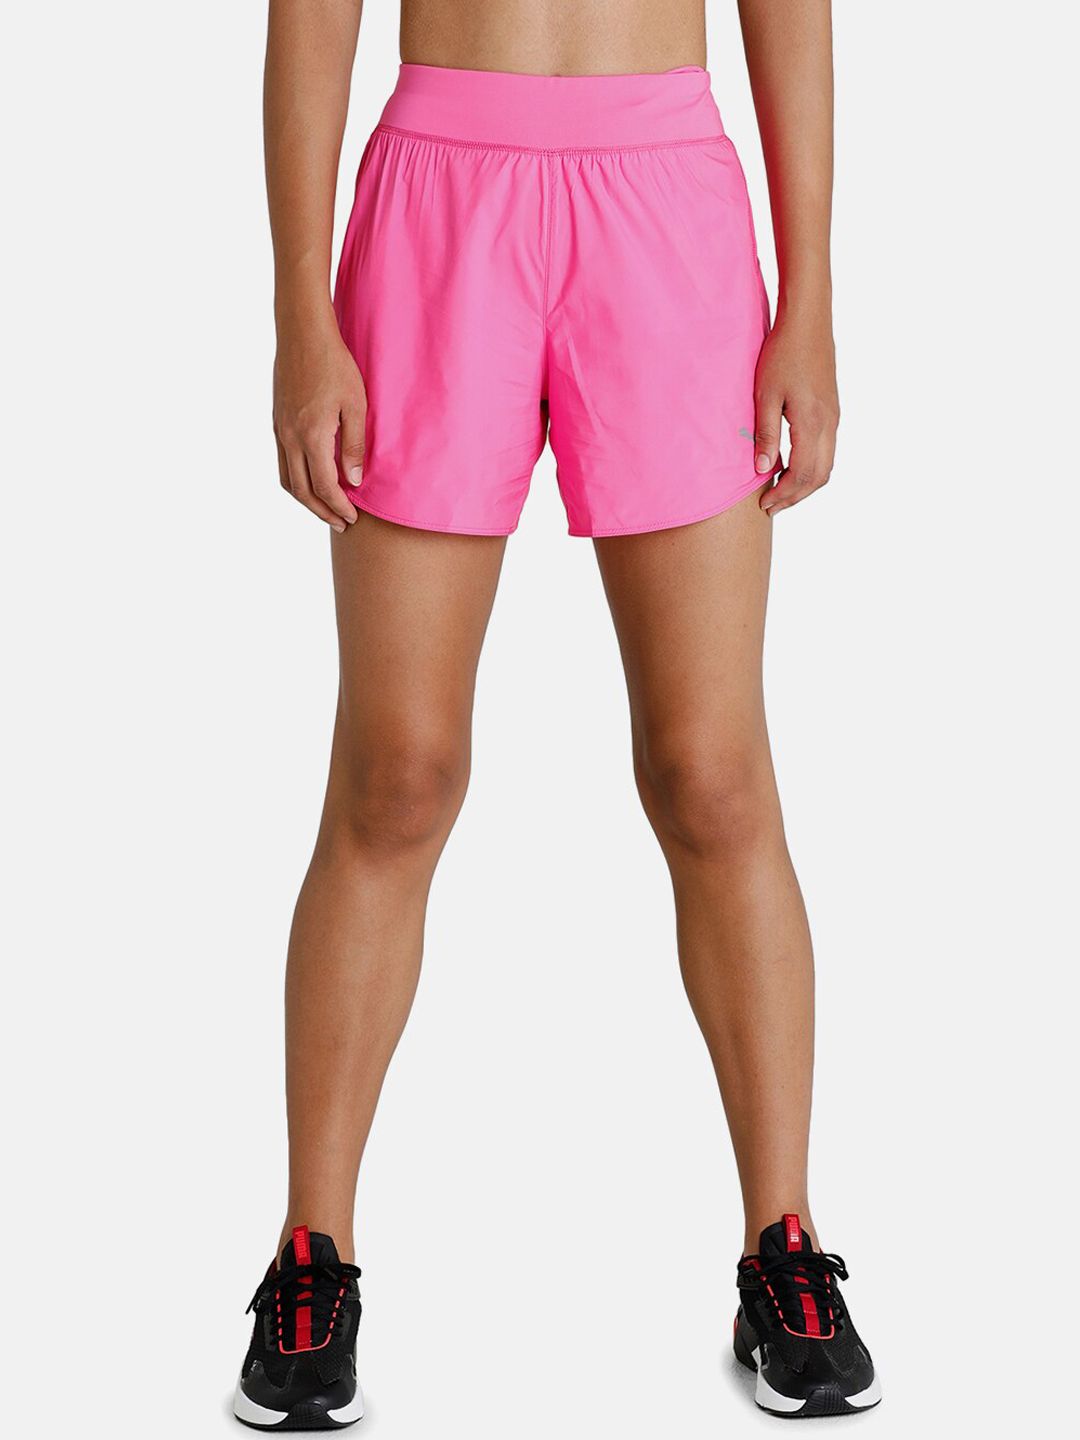 Puma Women Pink IGNITE WindCELL Reflective Tec Running Shorts Price in India